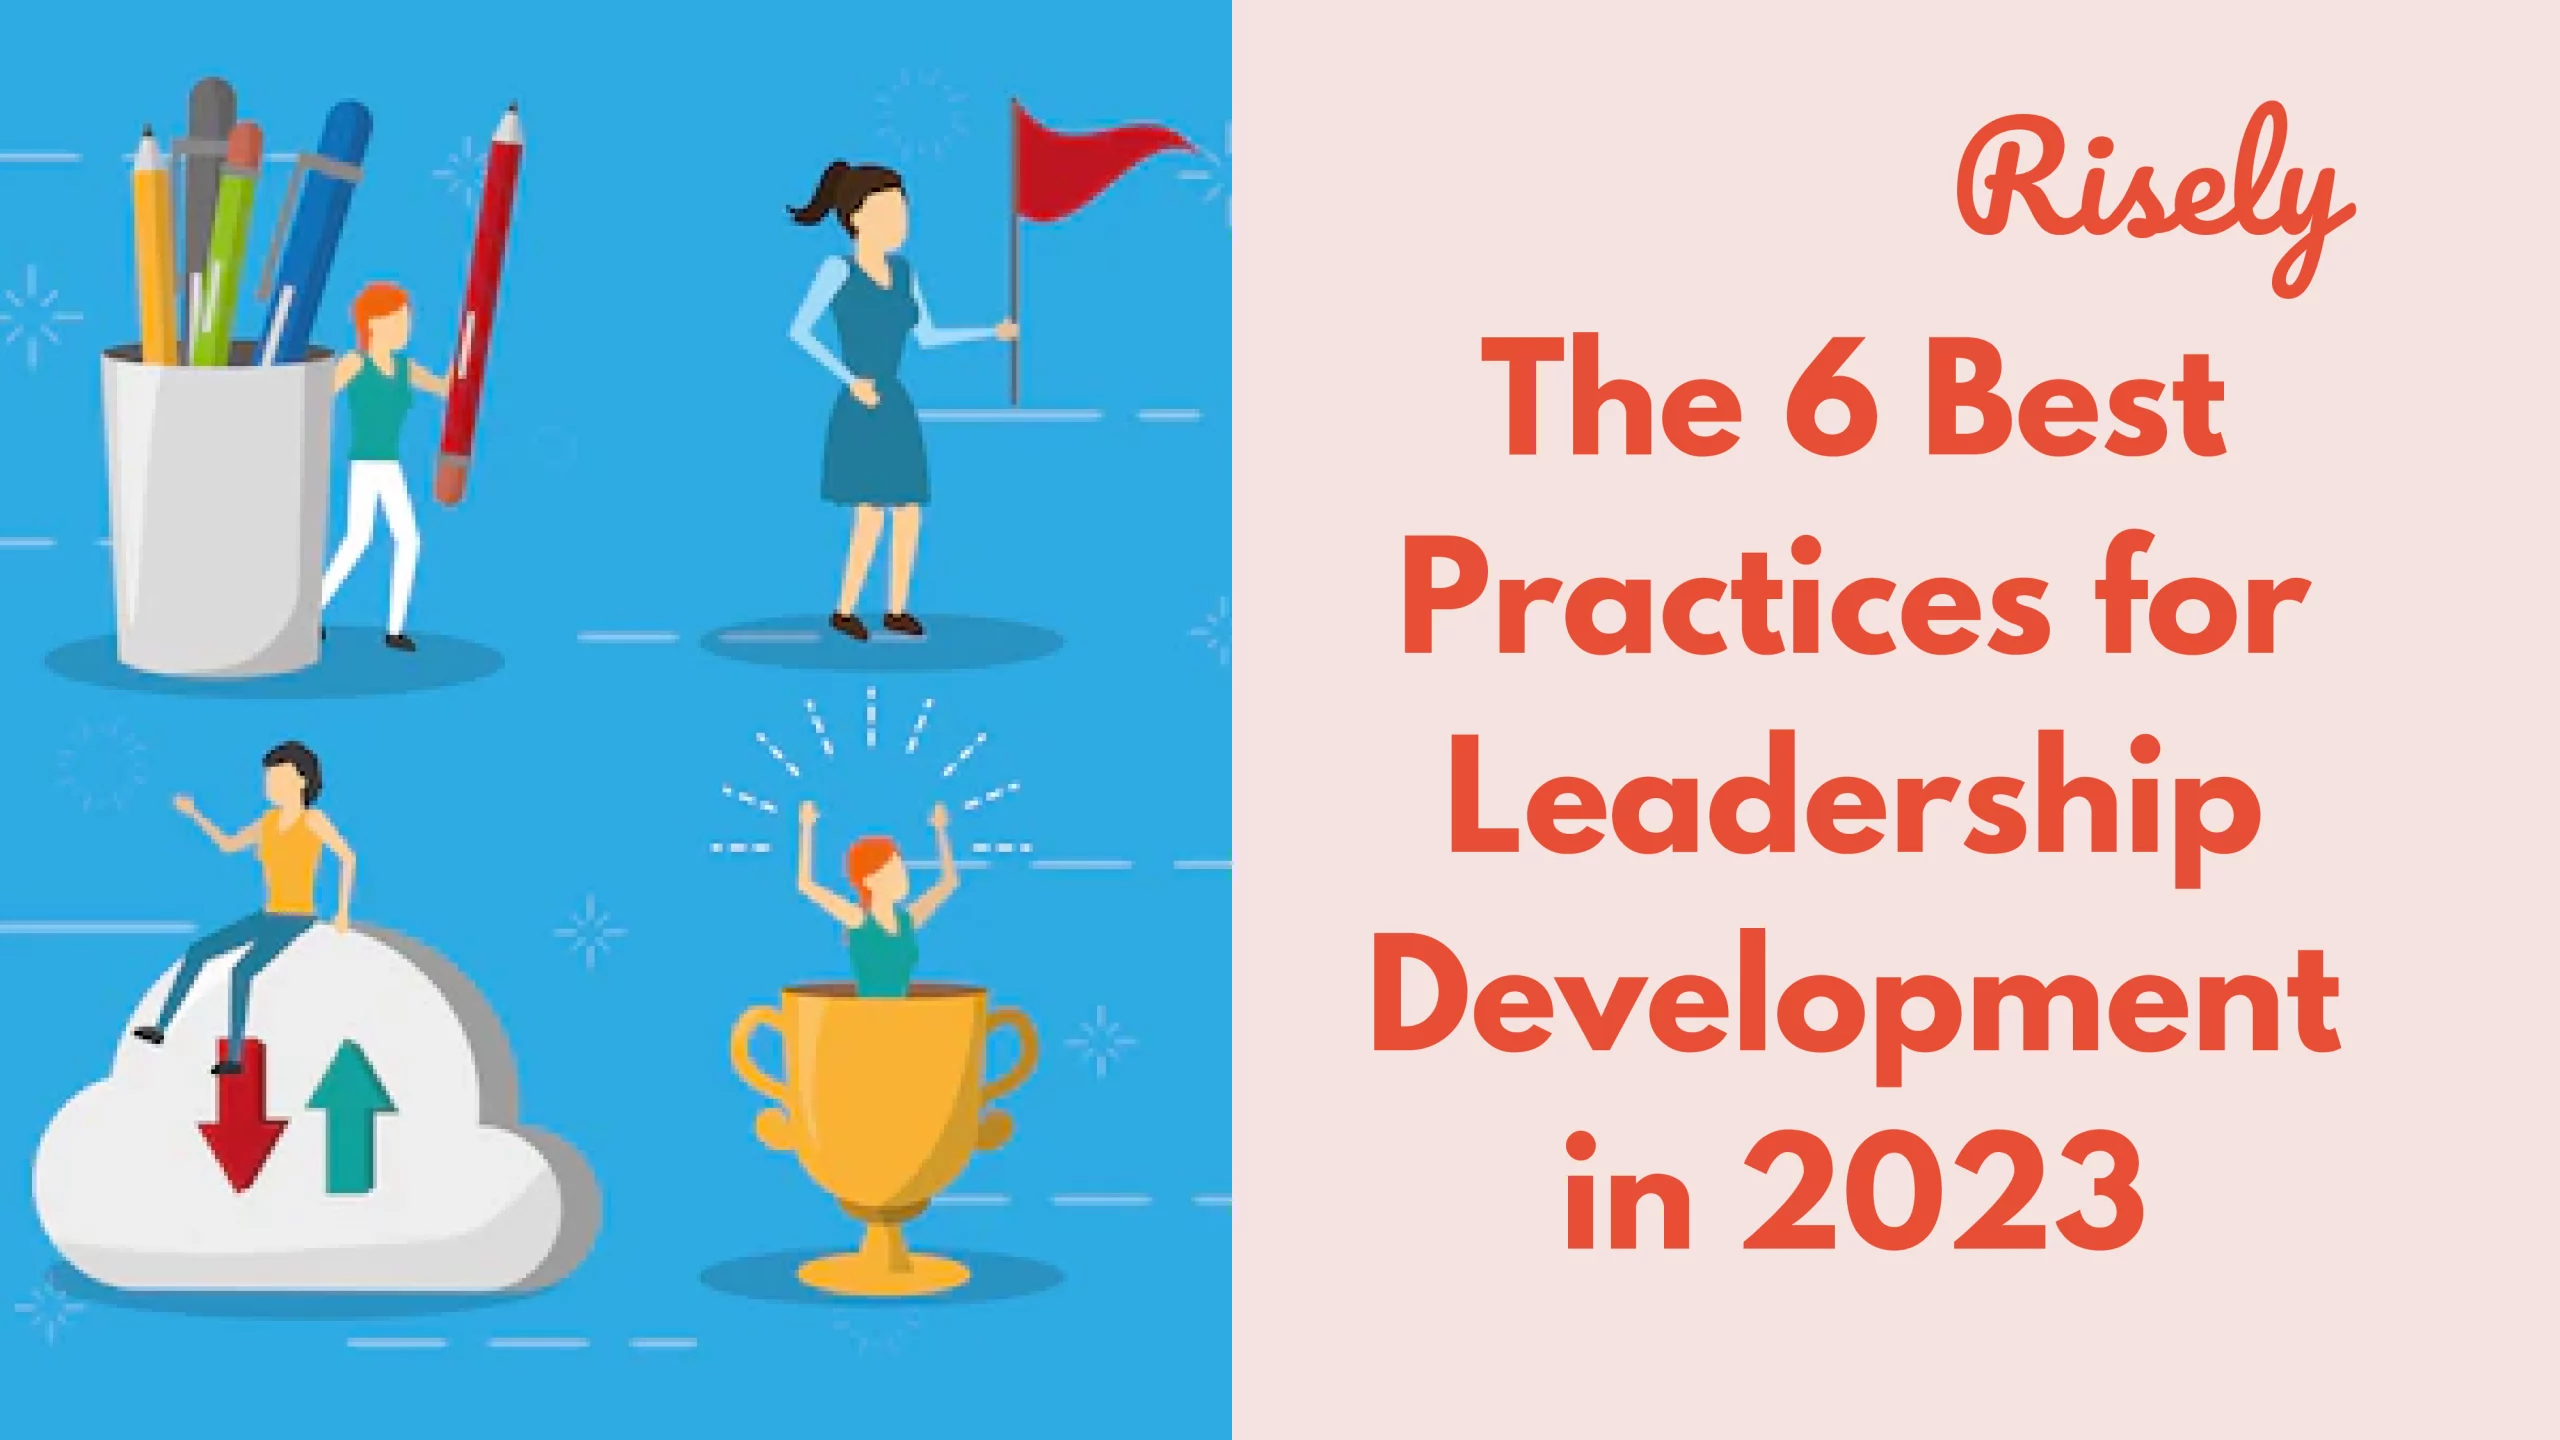 The Top 6 Best Practices for Leadership Development in 2023